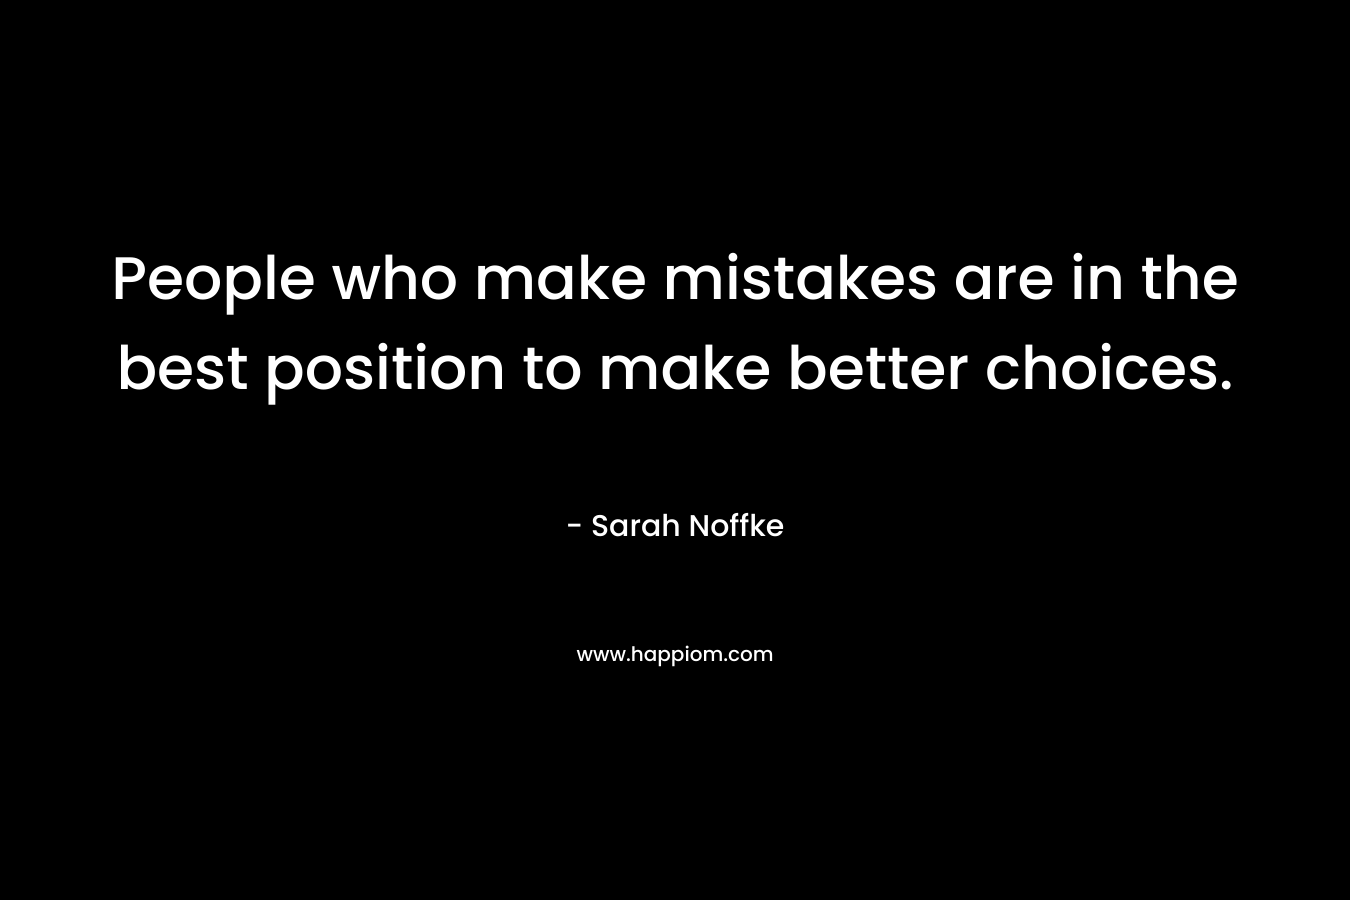 People who make mistakes are in the best position to make better choices.